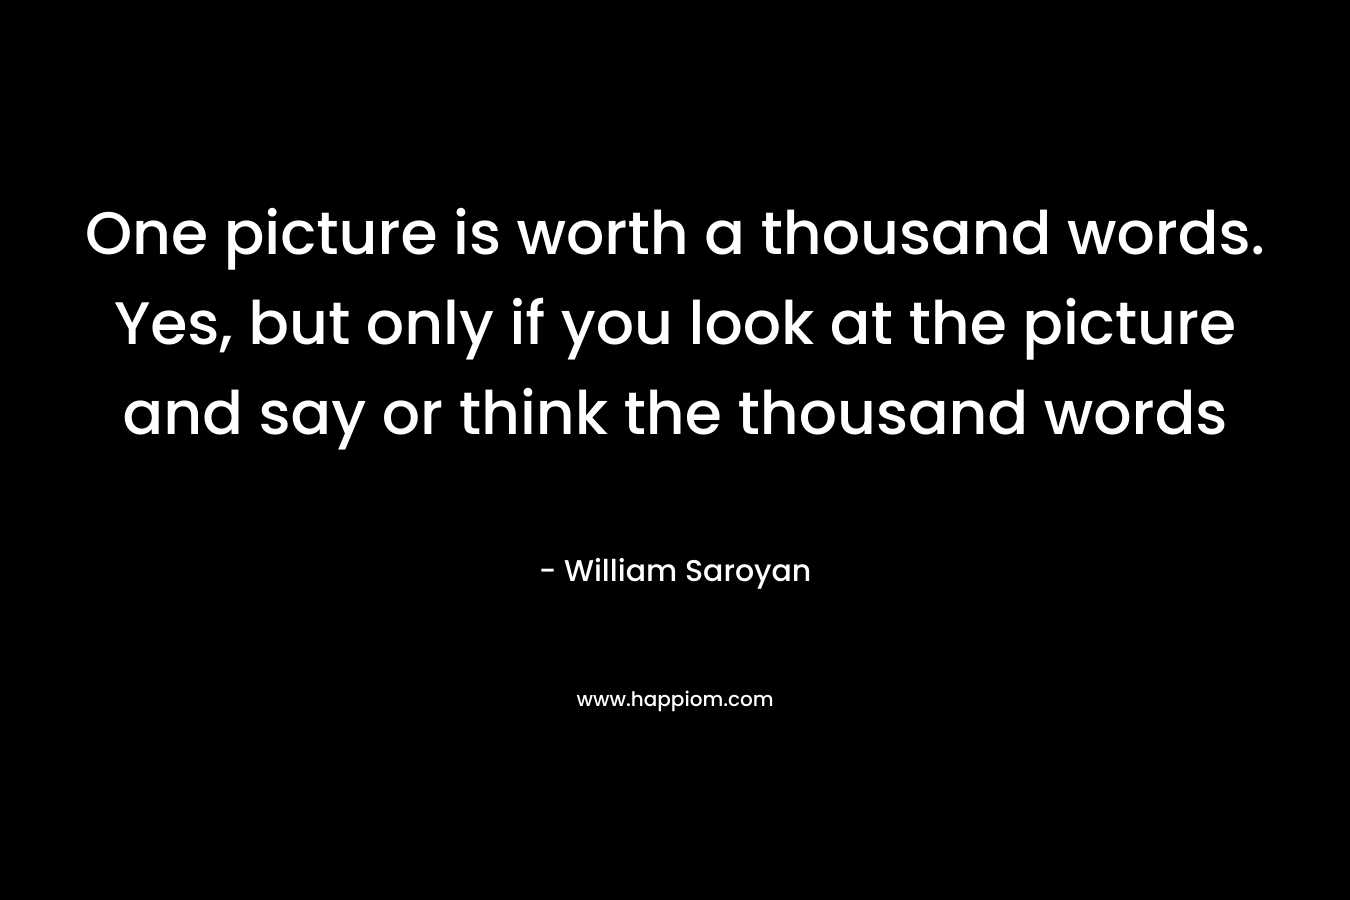 One picture is worth a thousand words. Yes, but only if you look at the picture and say or think the thousand words – William Saroyan